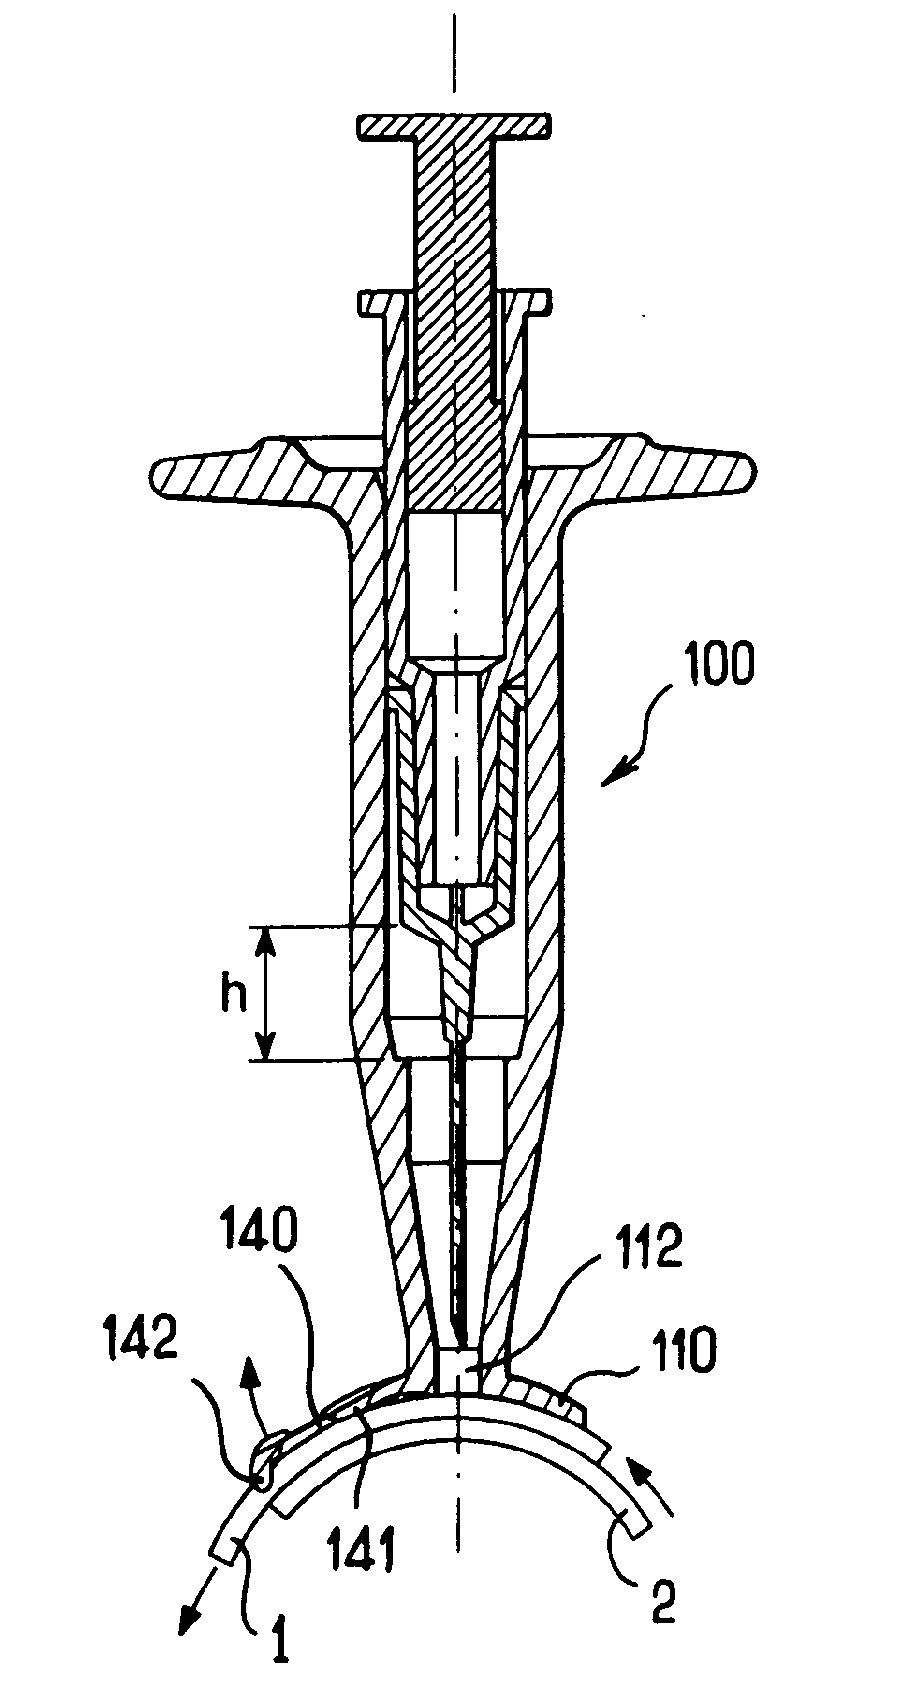 Apparatus for intra-ocular injection